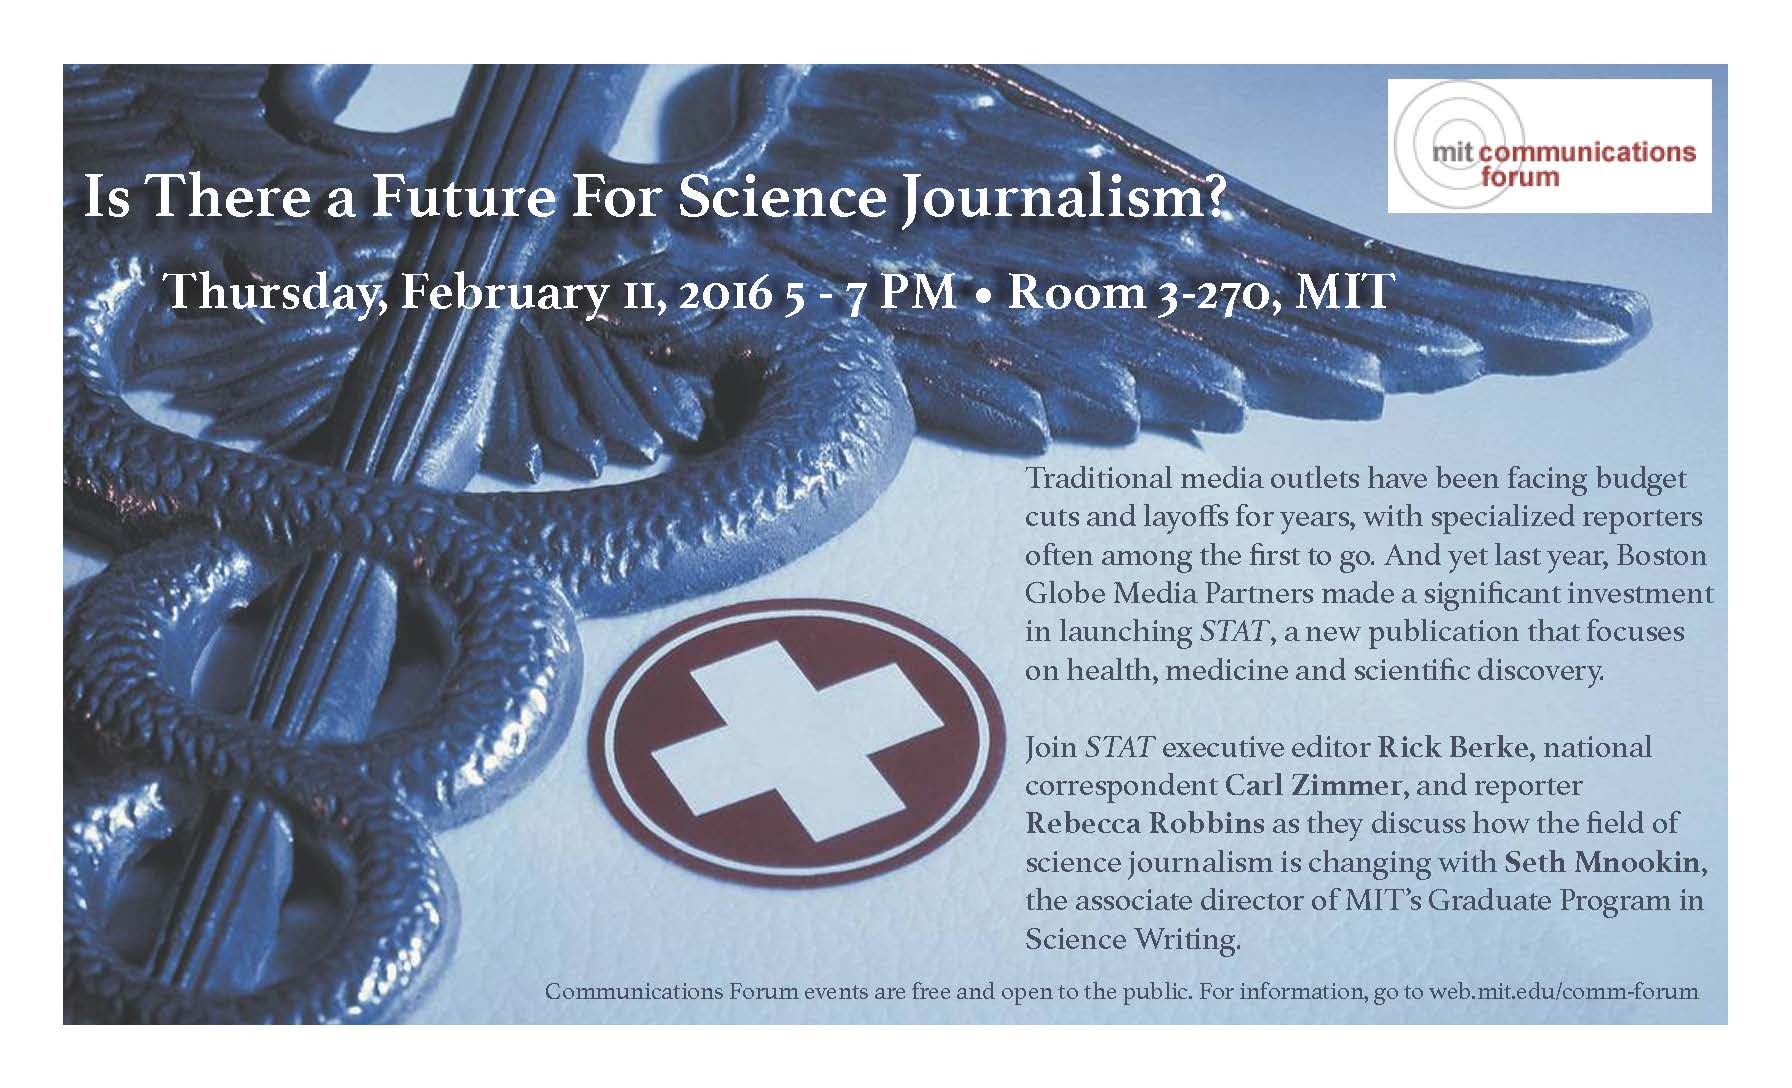 Communications Forum: “Is There a Future for In-Depth Science Journalism?” 2/11/16, 5pm